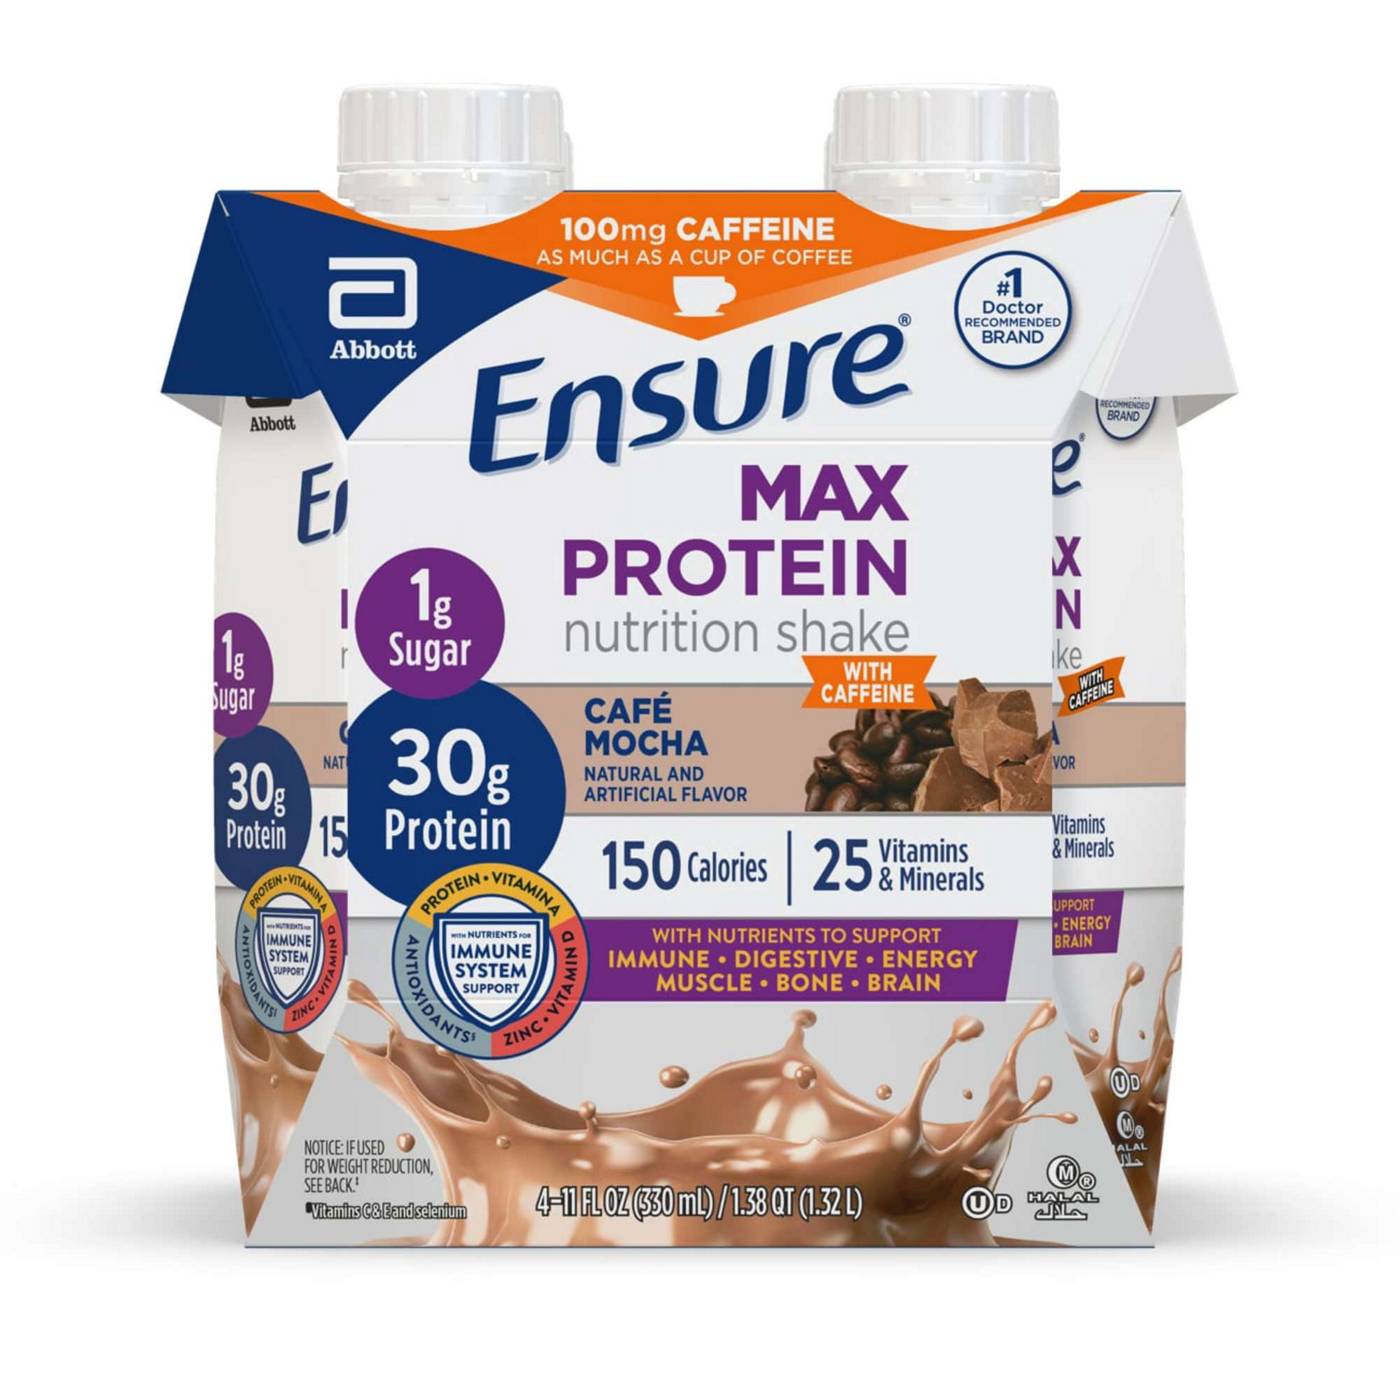 Ensure Max Protein Nutrition Shake Cafe Mocha 4 pk Ready-to-Drink; image 1 of 13